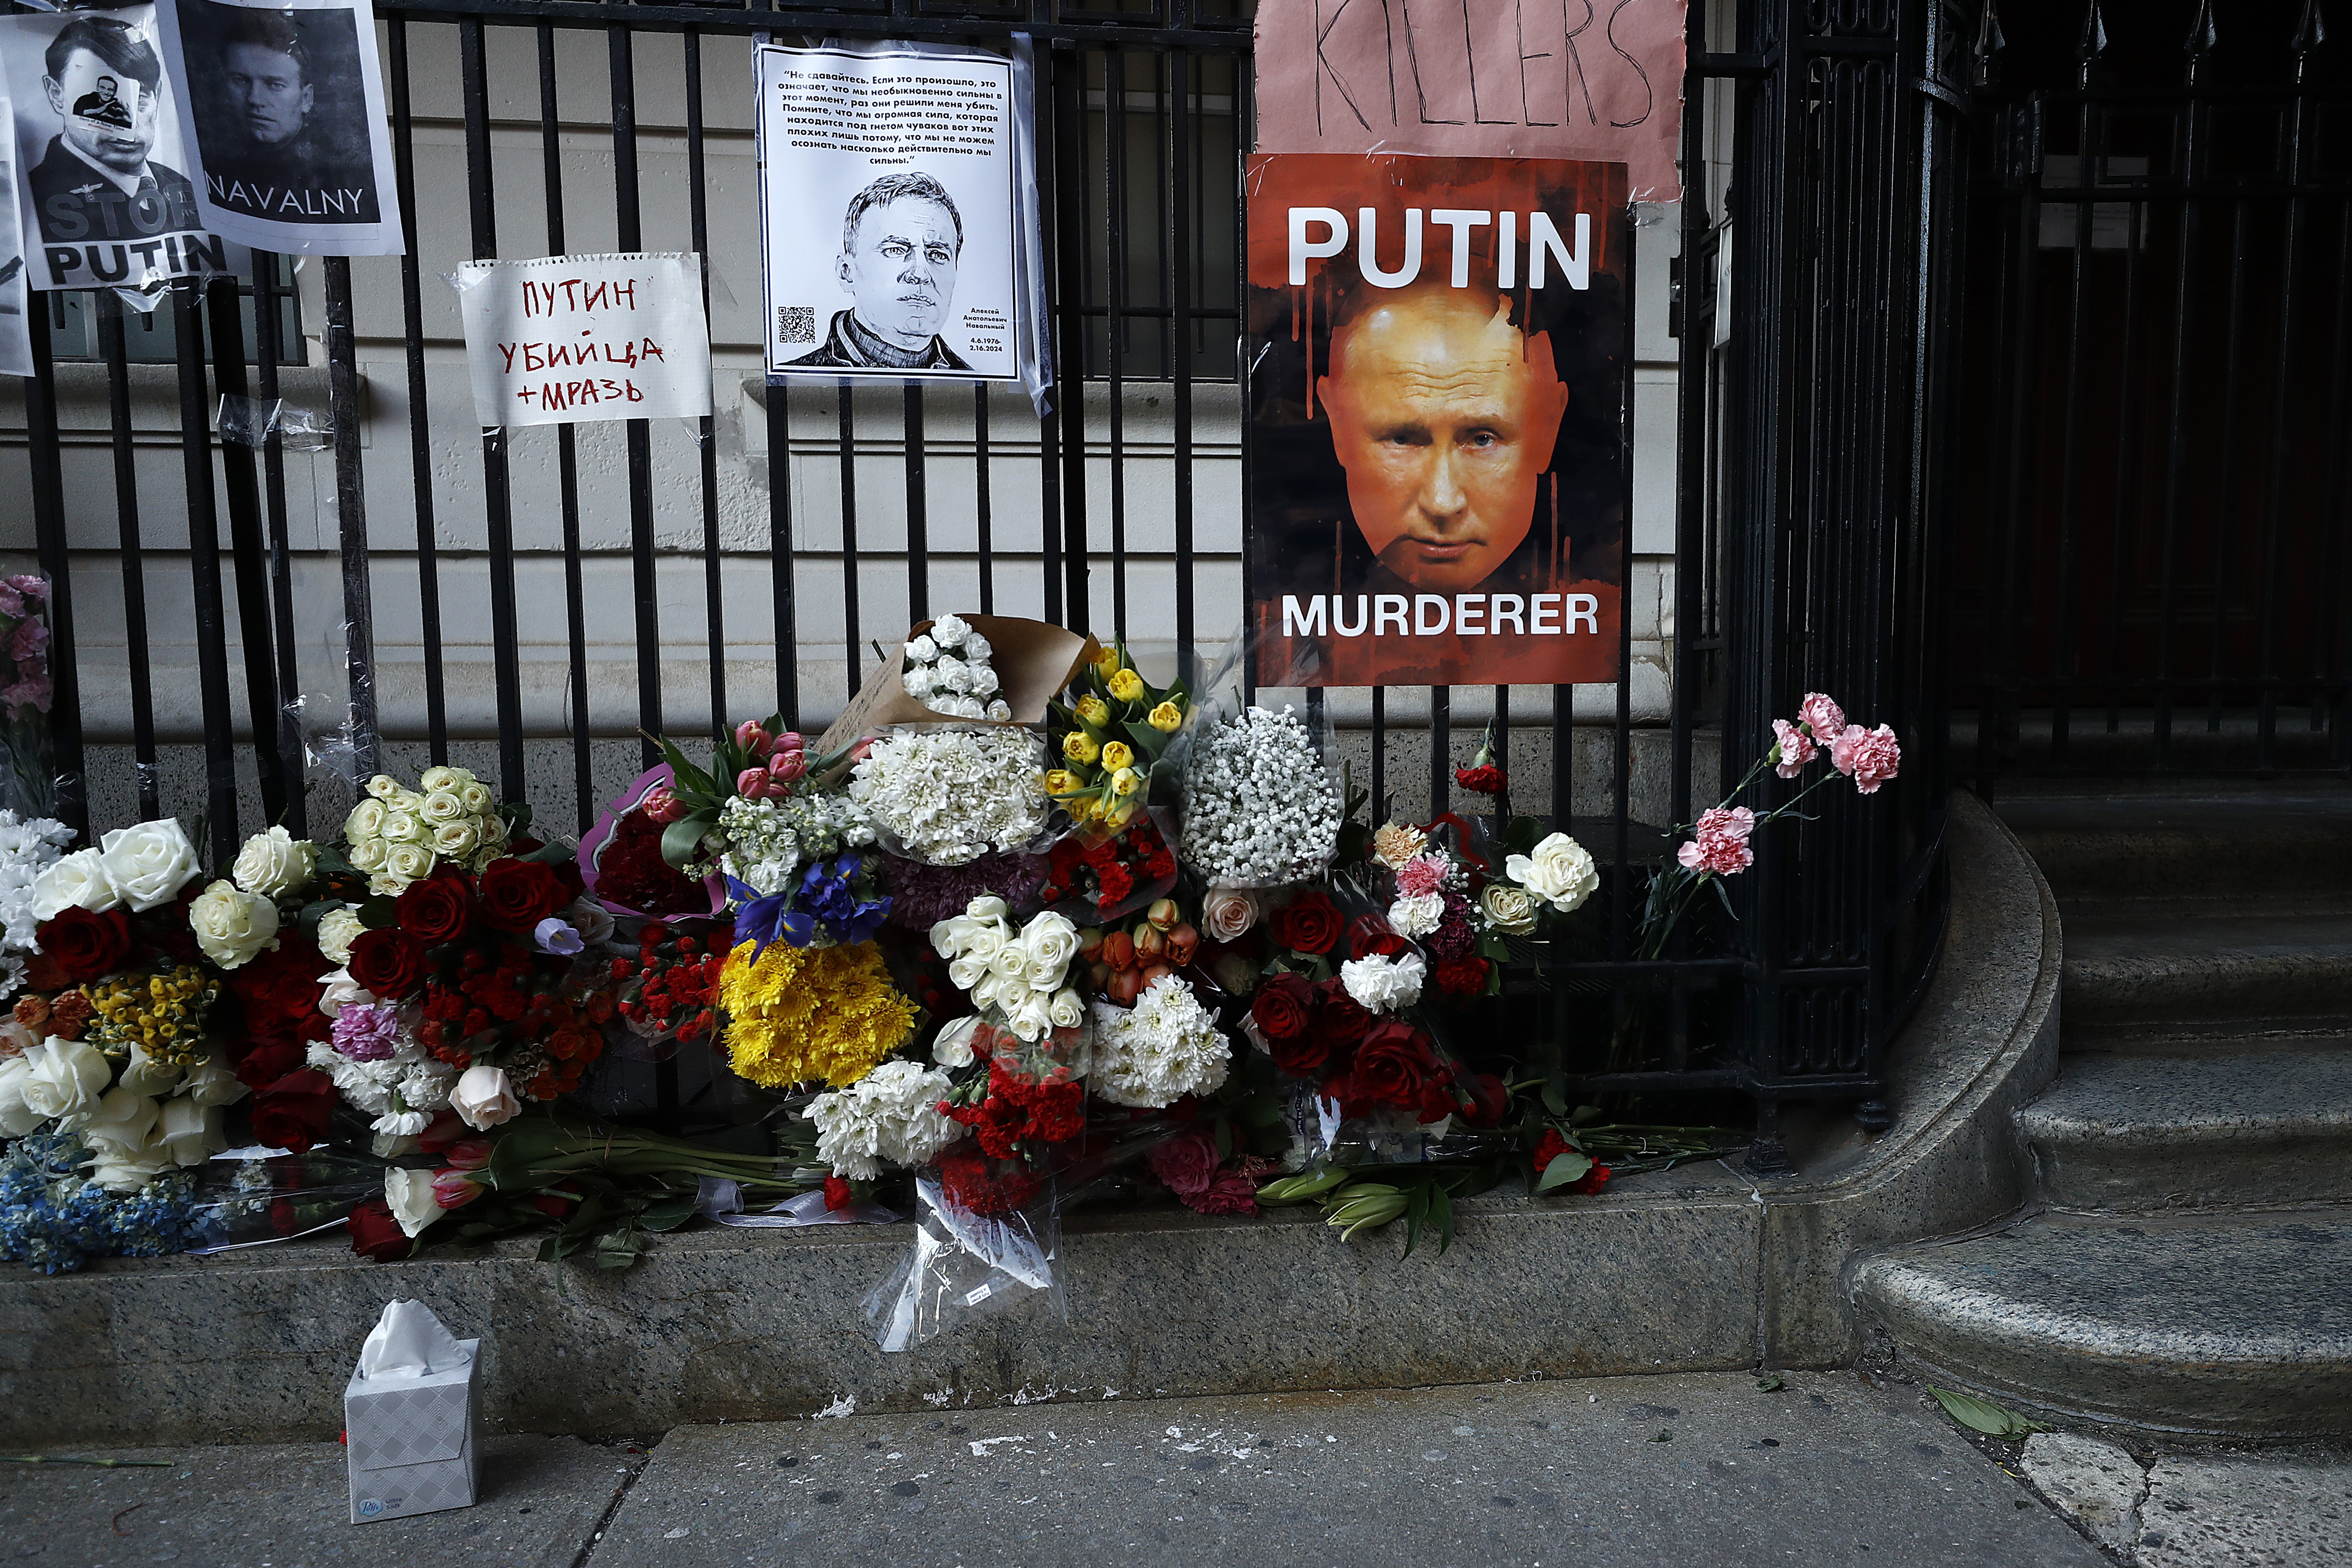 Flowers and signs are placed outside the Russian Consulate for Navalny